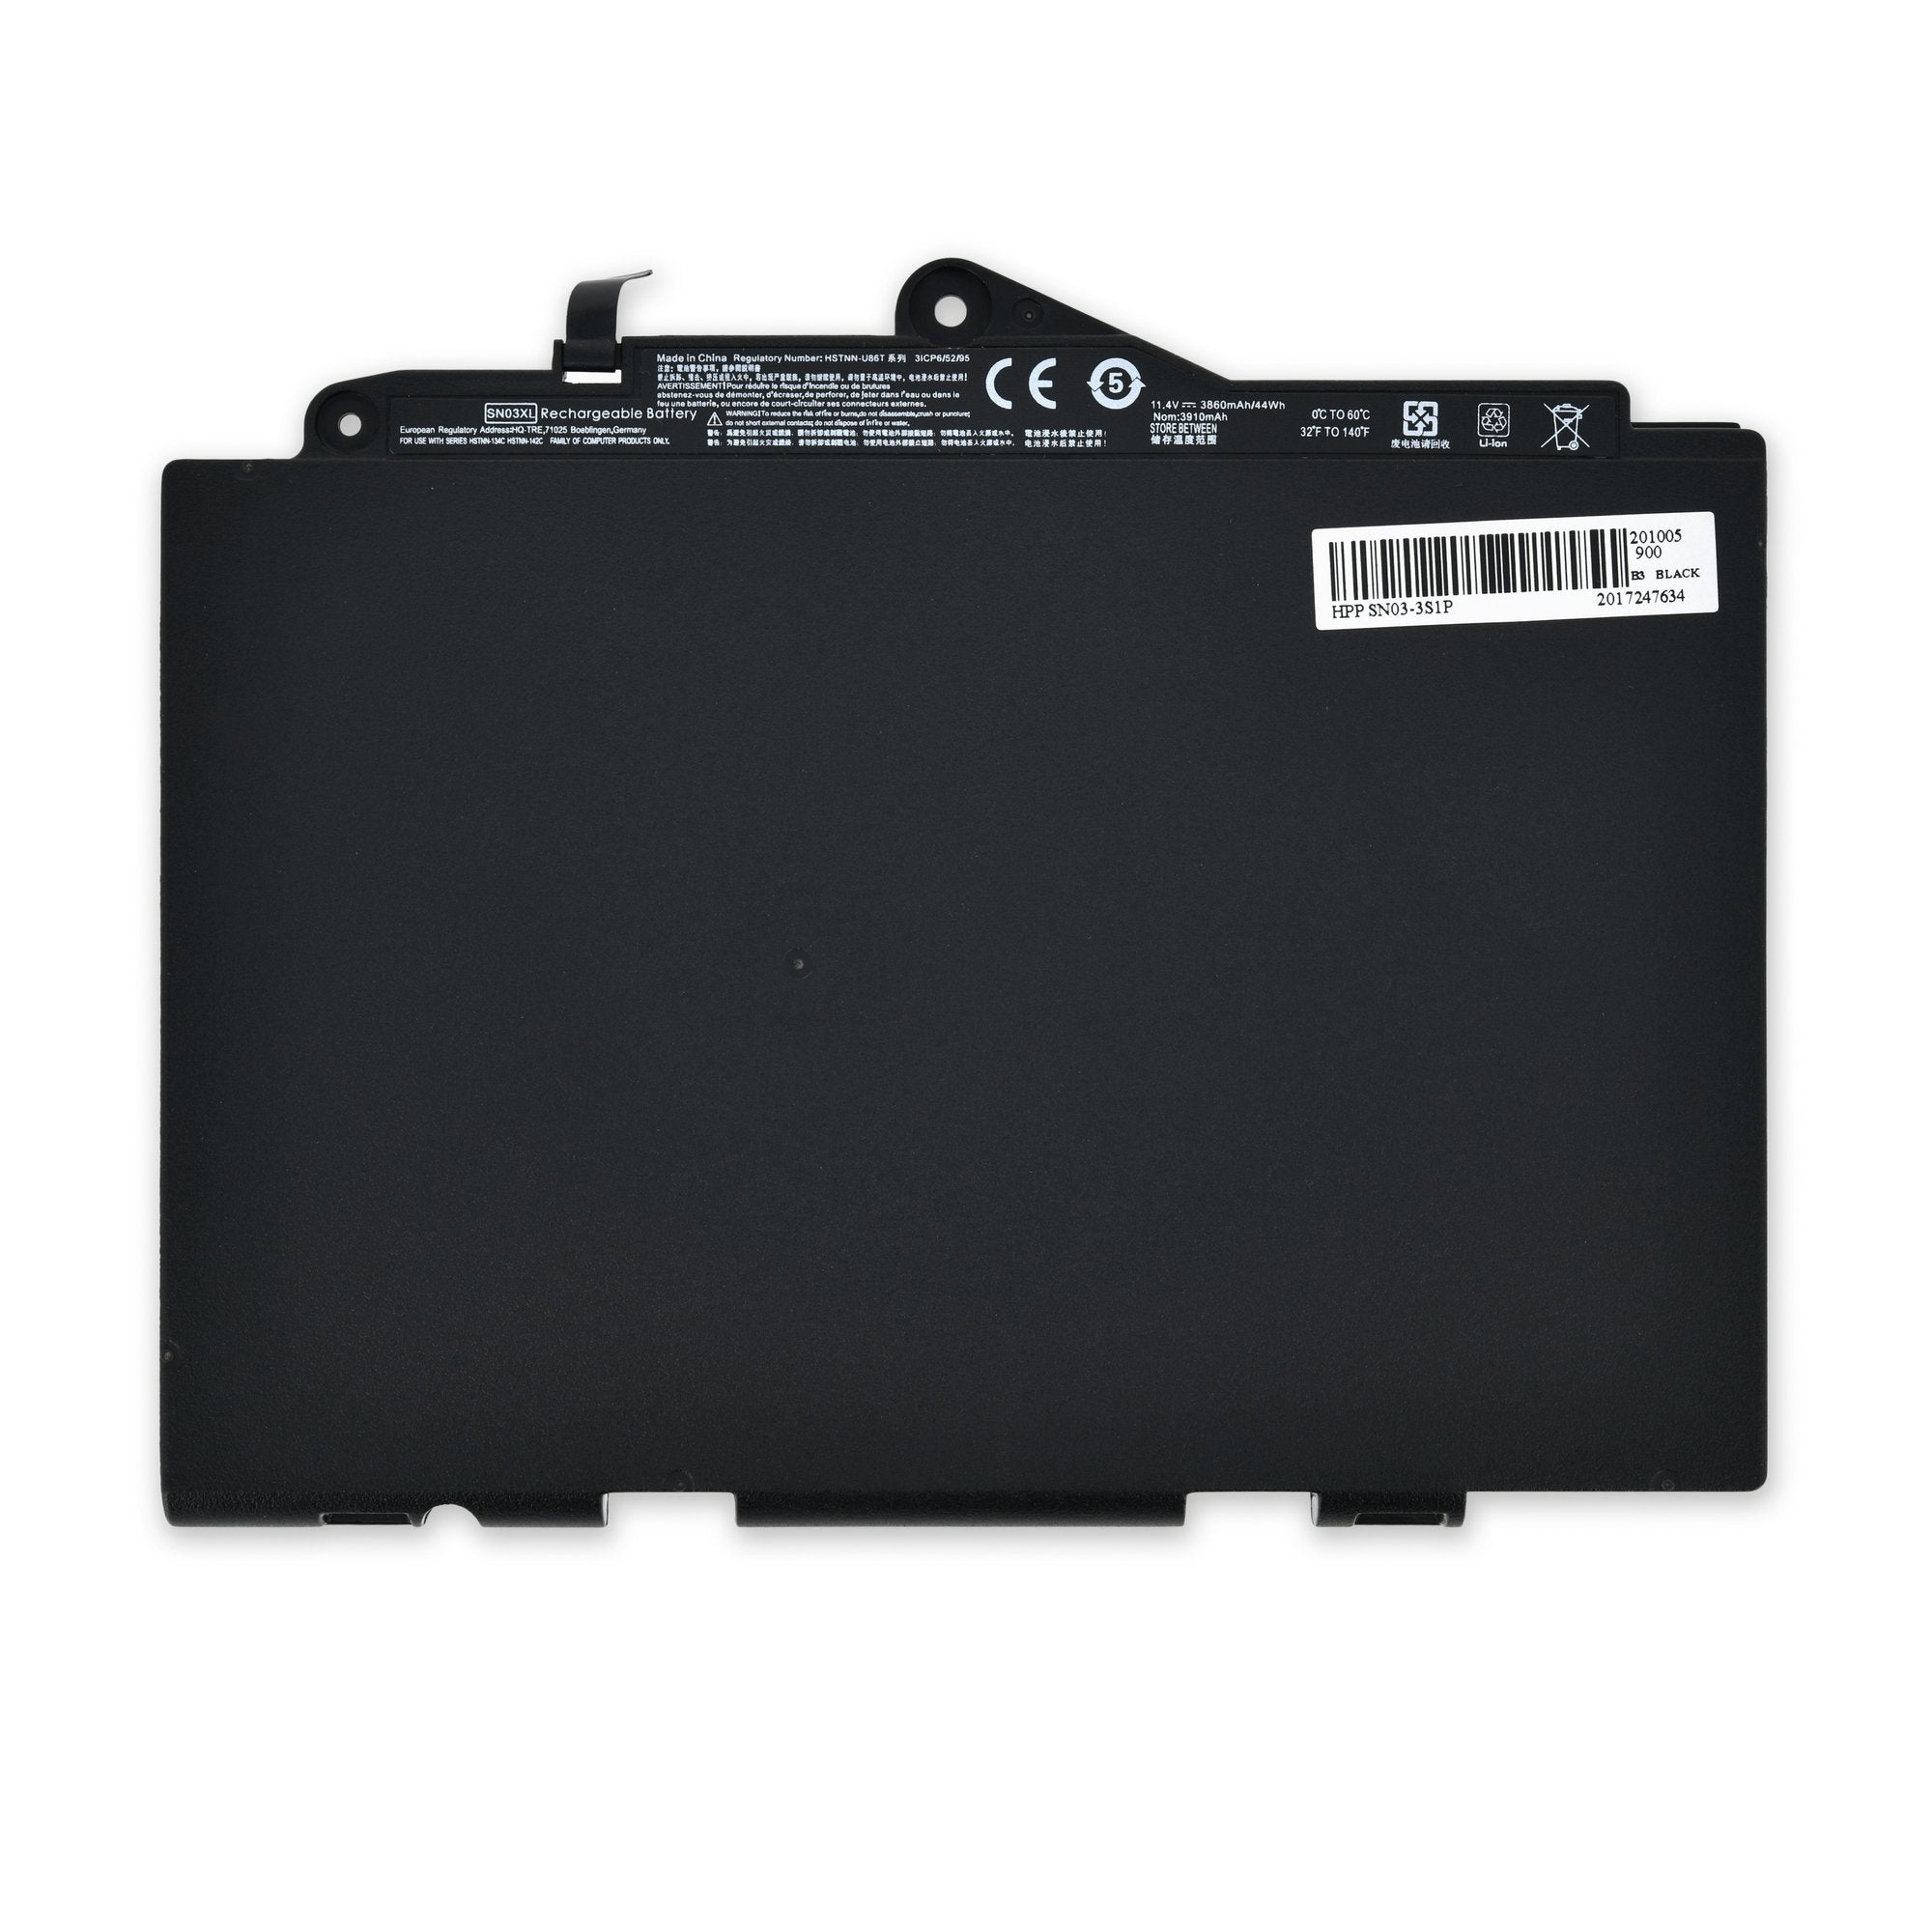 HP EliteBook 725 and 820 G3 Battery New Part Only